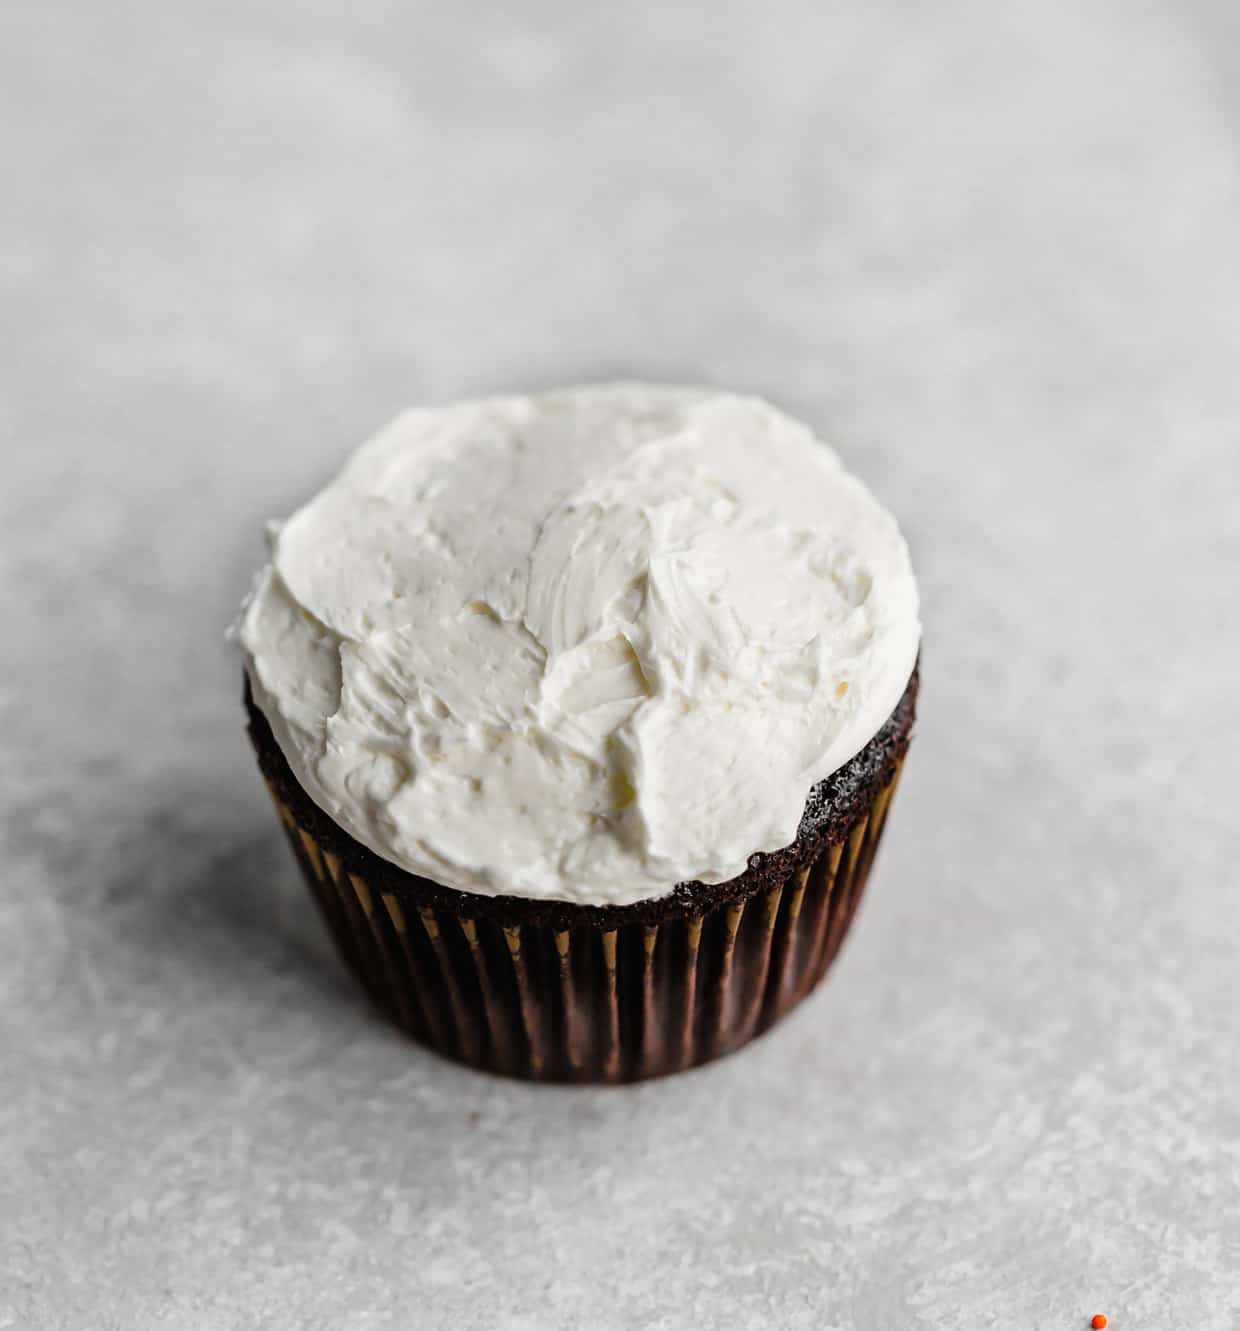 A swiss meringue buttercream frosted chocolate cupcake on a grey background.